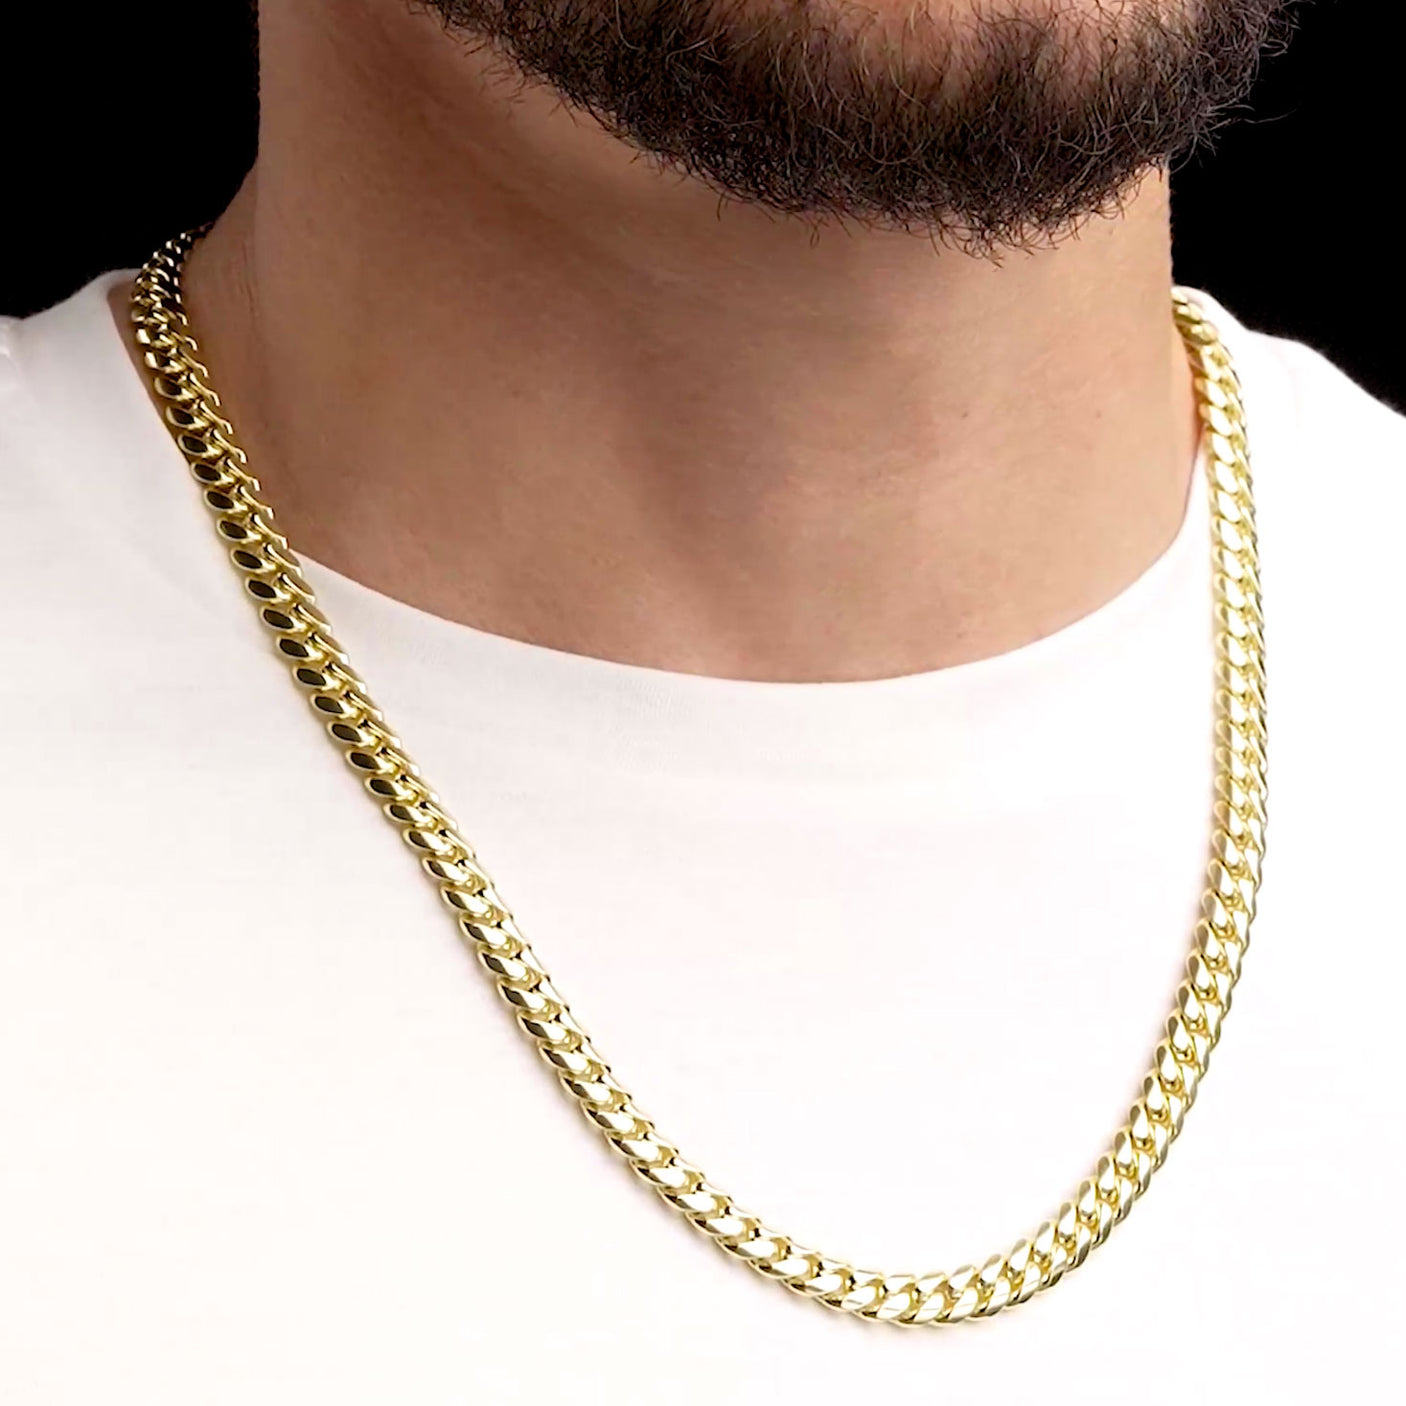 10k 14k Solid Gold Cuban Link Chain Mens Fashion Jewelry The Gold Gods 8mm 22 inch